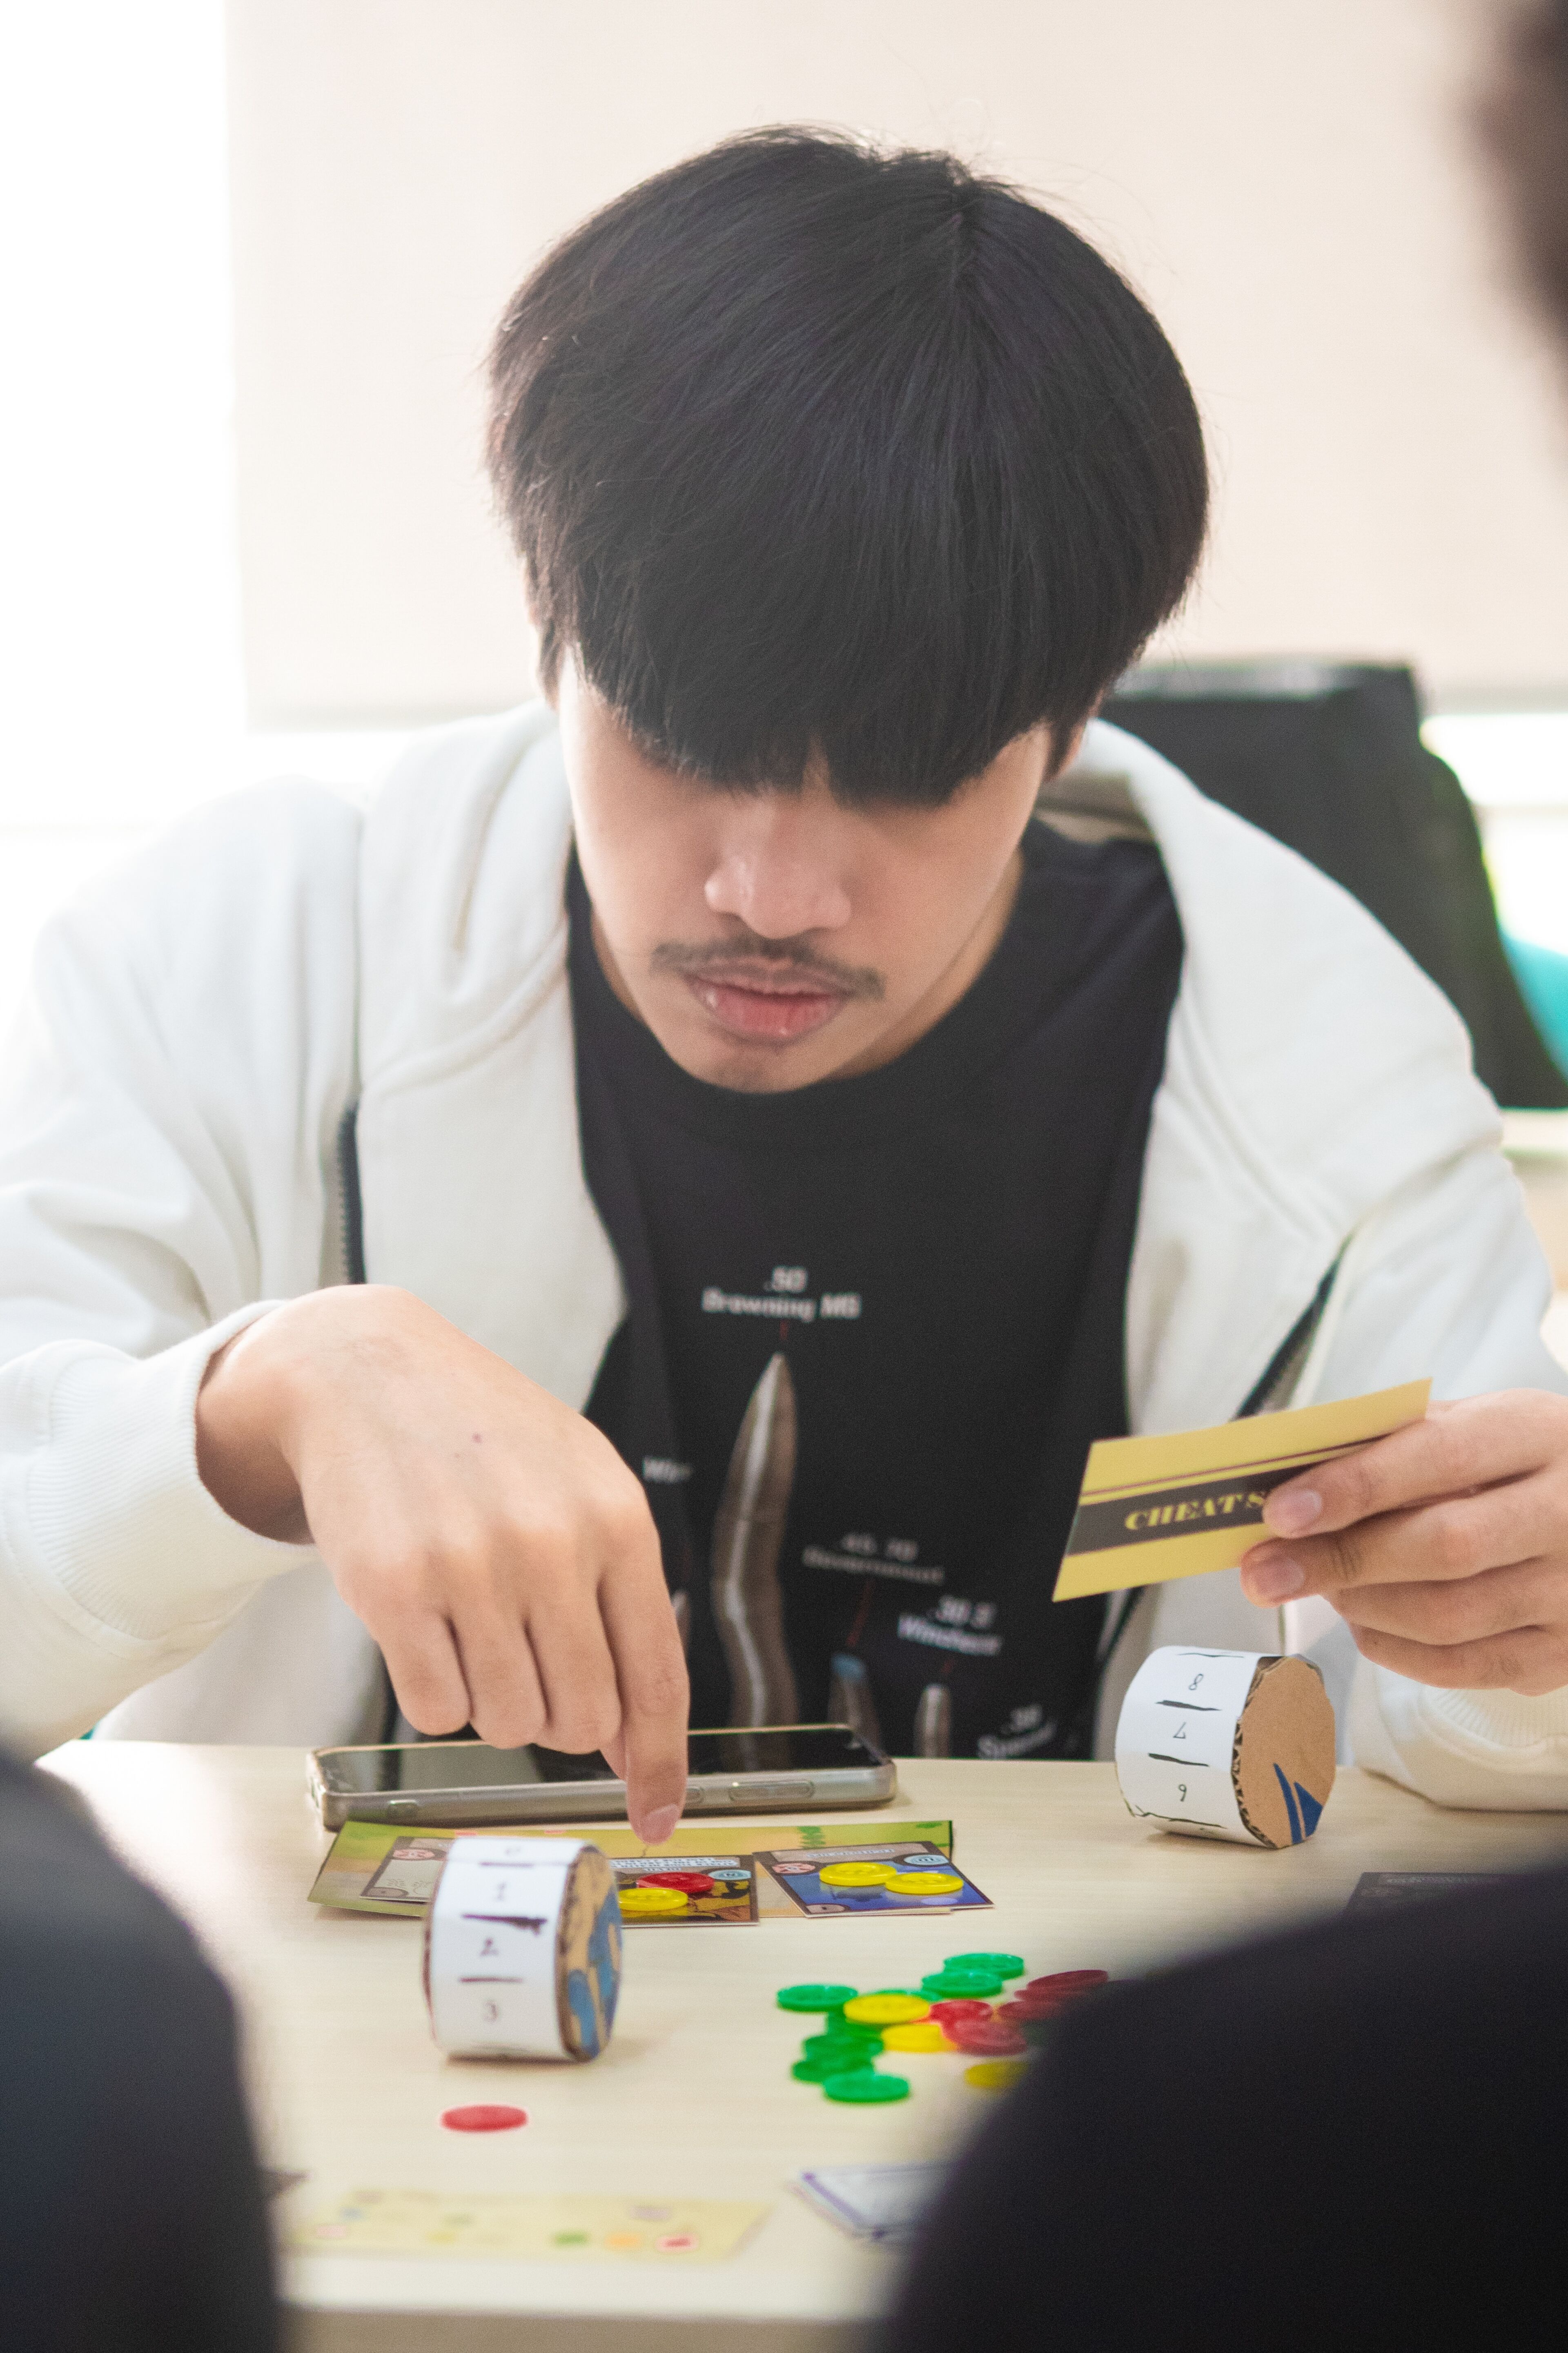 A focused individual engaging in a strategic board game, contemplating his next move with various game pieces and cards on the table.